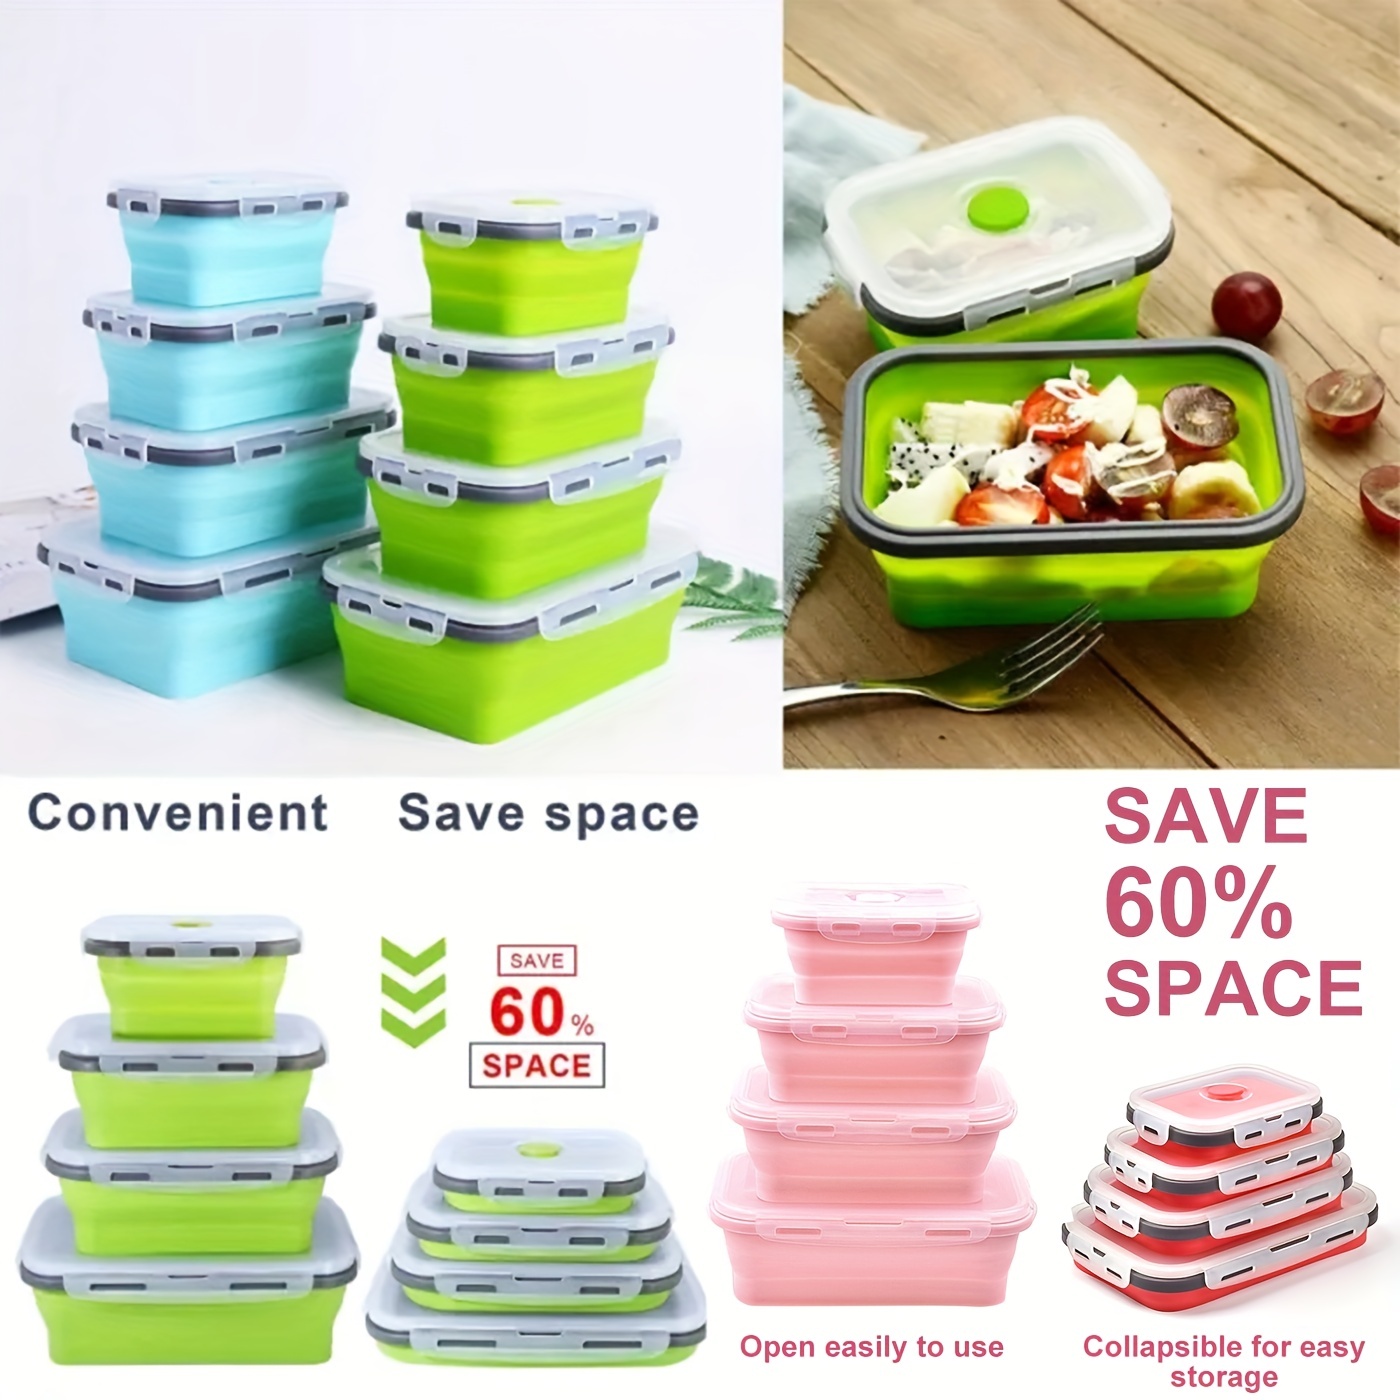 3 Compartments Large Capacity Lunchbox Reusable PP Meal Prep Container  Leakproof Microwaveable for Working Traveling Camping - AliExpress